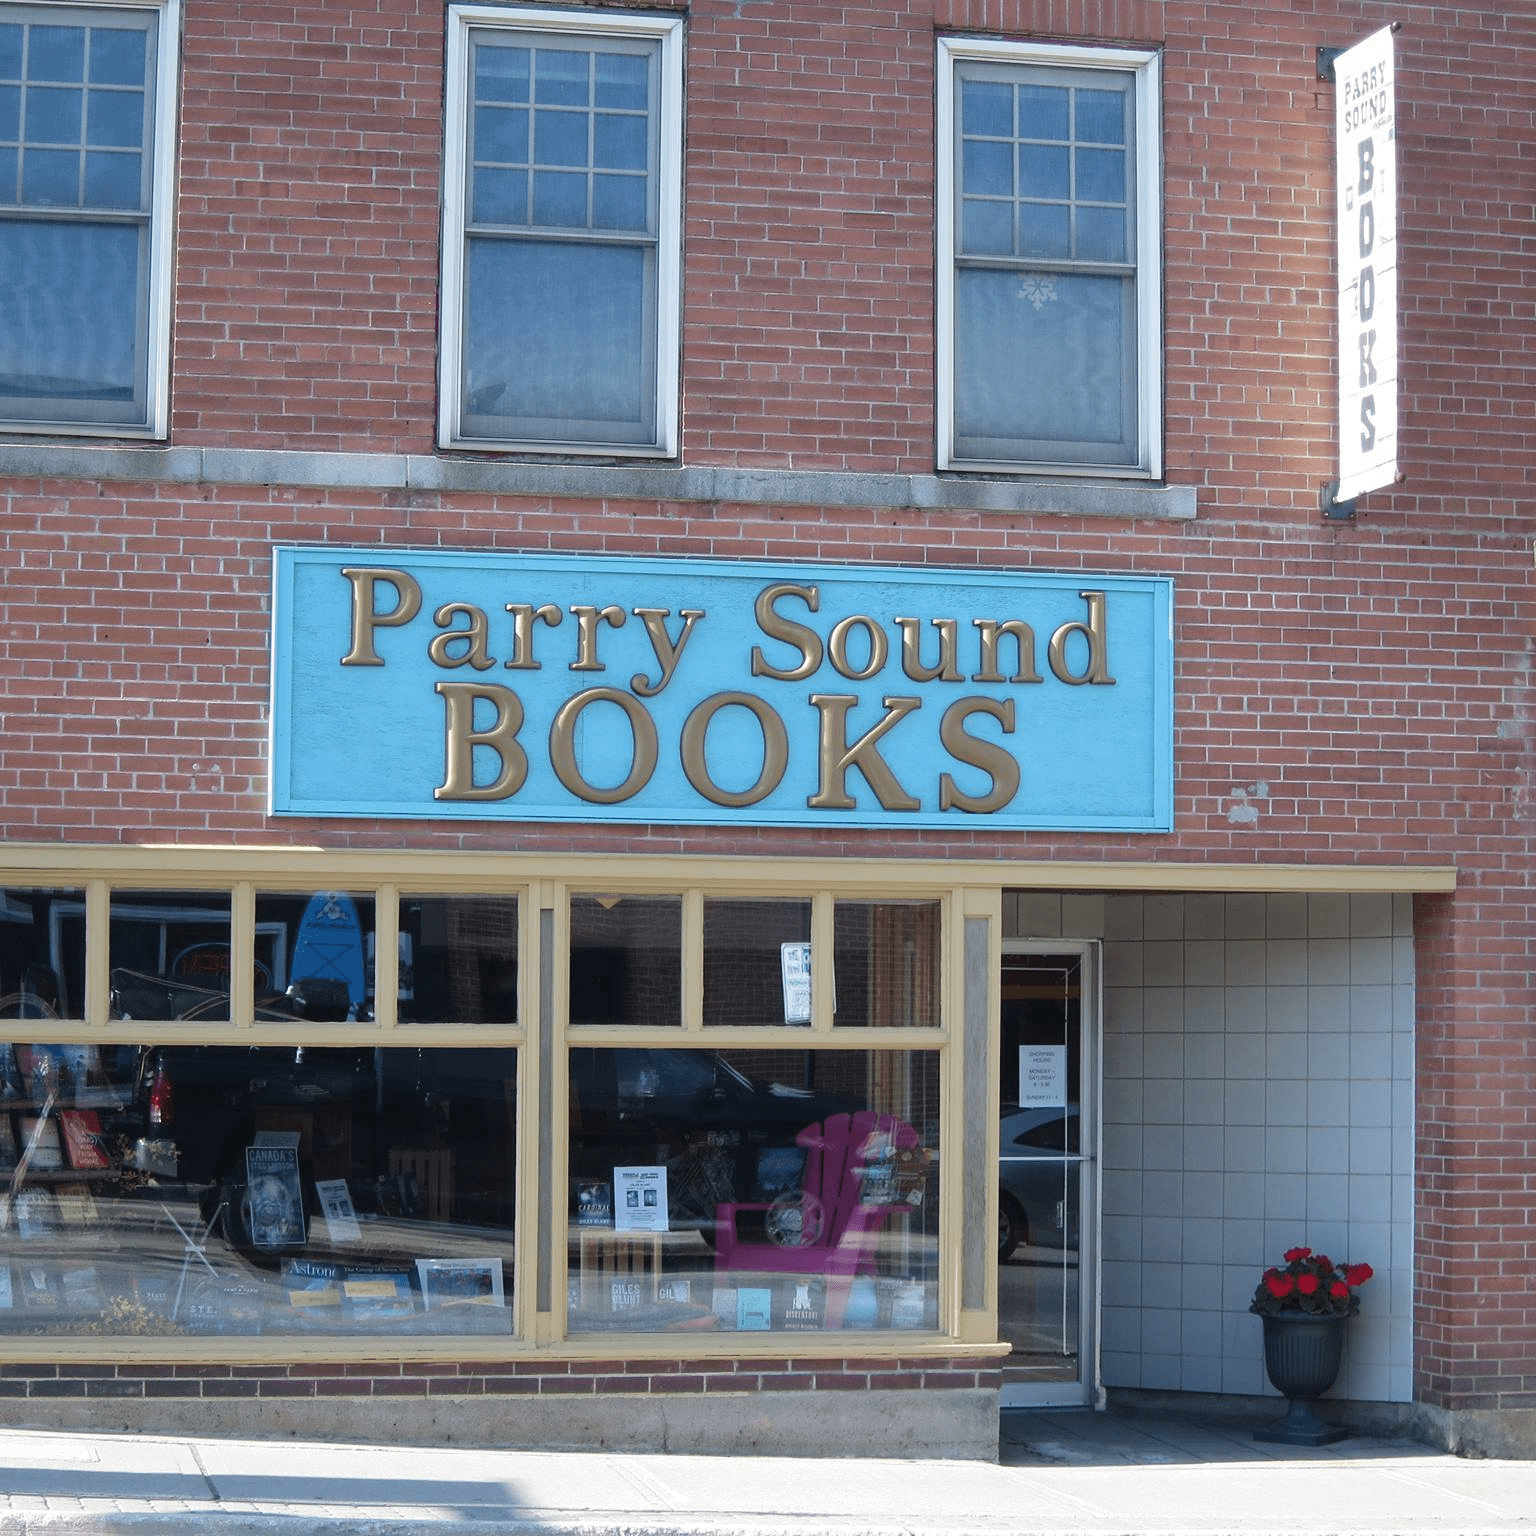 outside of the Parry Sound Books store